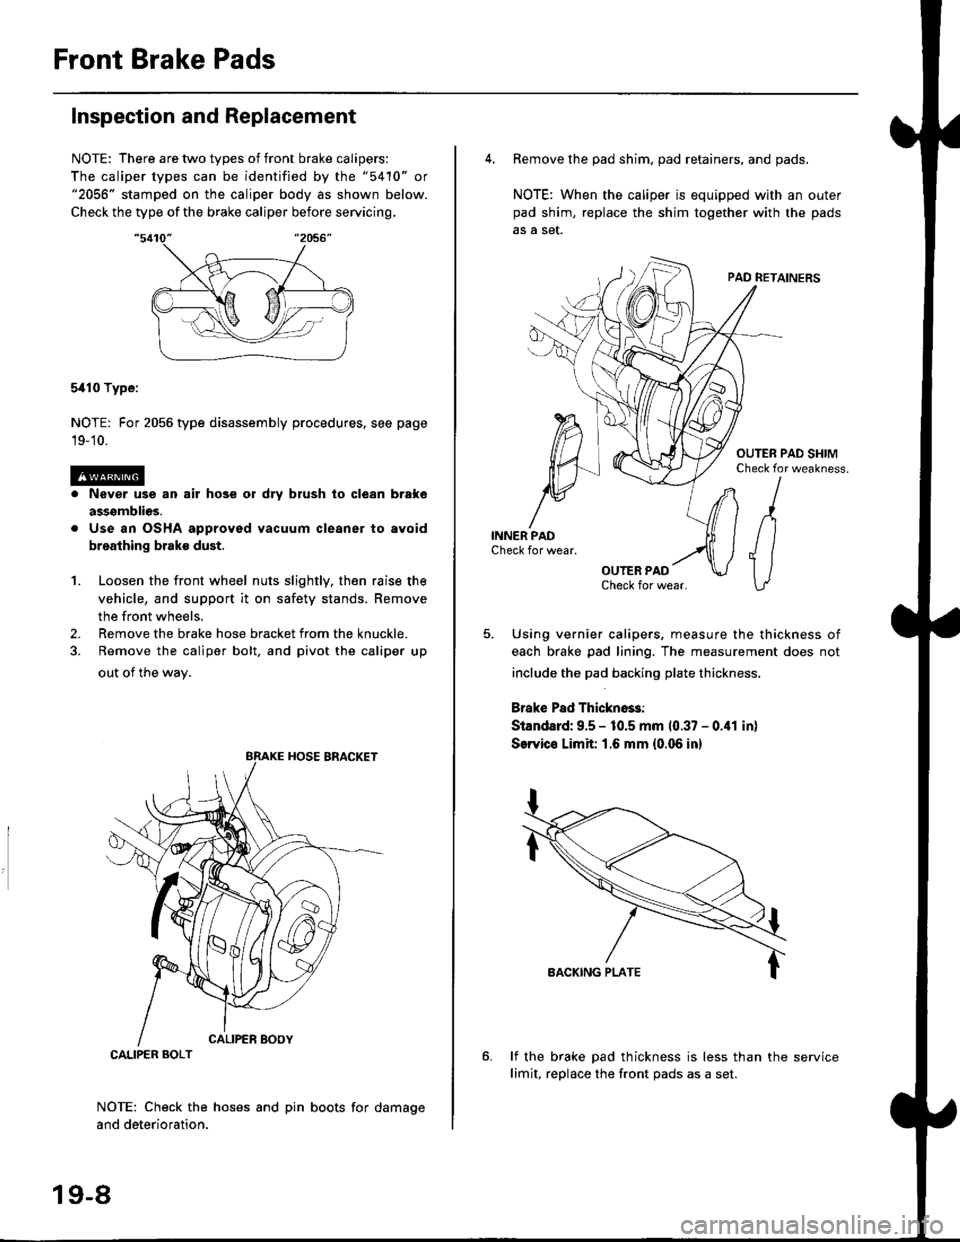 HONDA CIVIC 1996 6.G Workshop Manual Front Brake Pads
Inspection and Replacement
NOTE: There are two types of front brake calipers:
The caliper types can be identified by the "5410" or"2056" stamped on the caliper body as shown below.
Ch